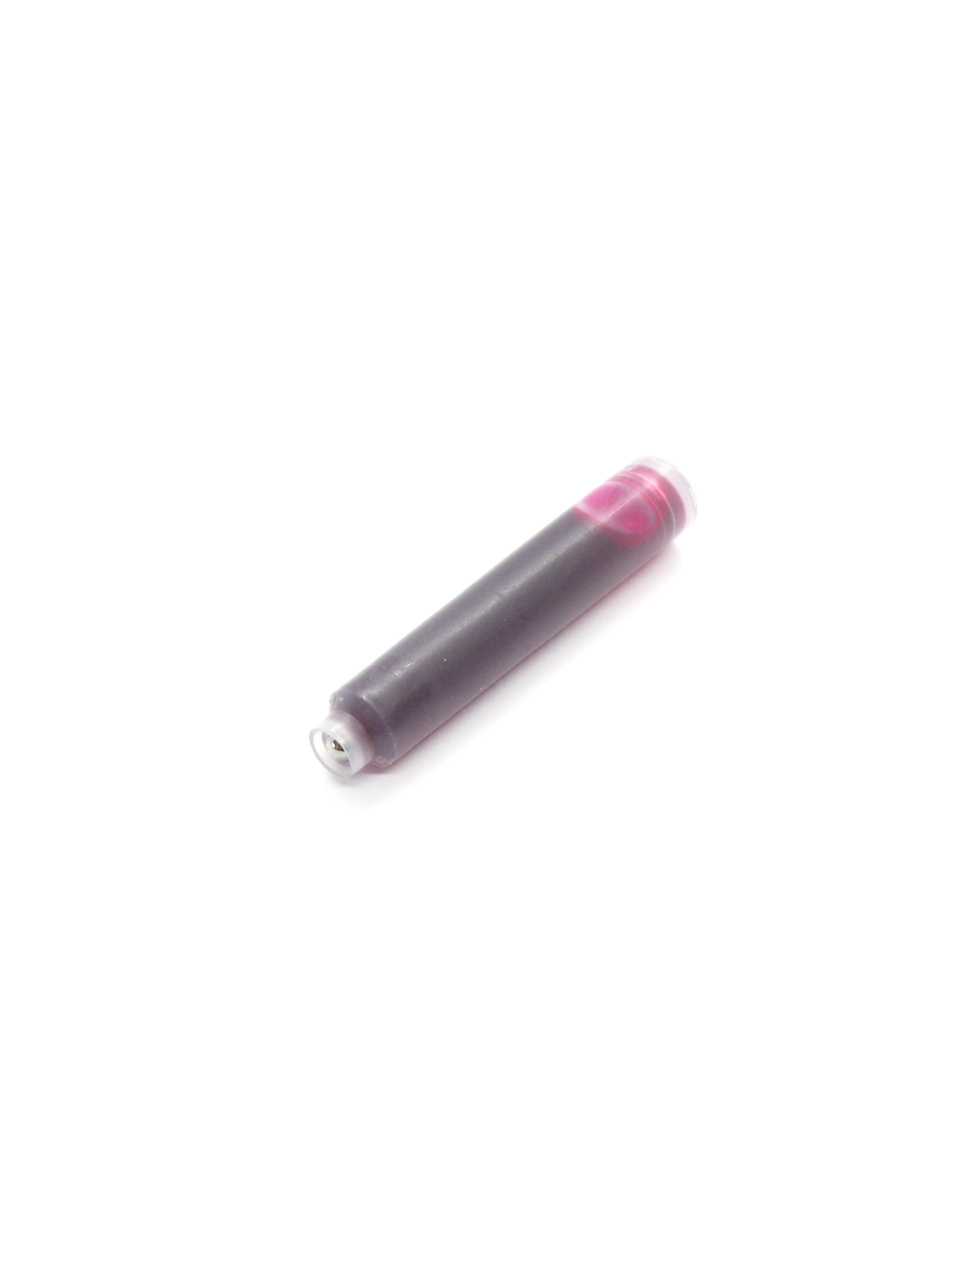 Cartridges For Omas Milord Fountain Pens (Pink)